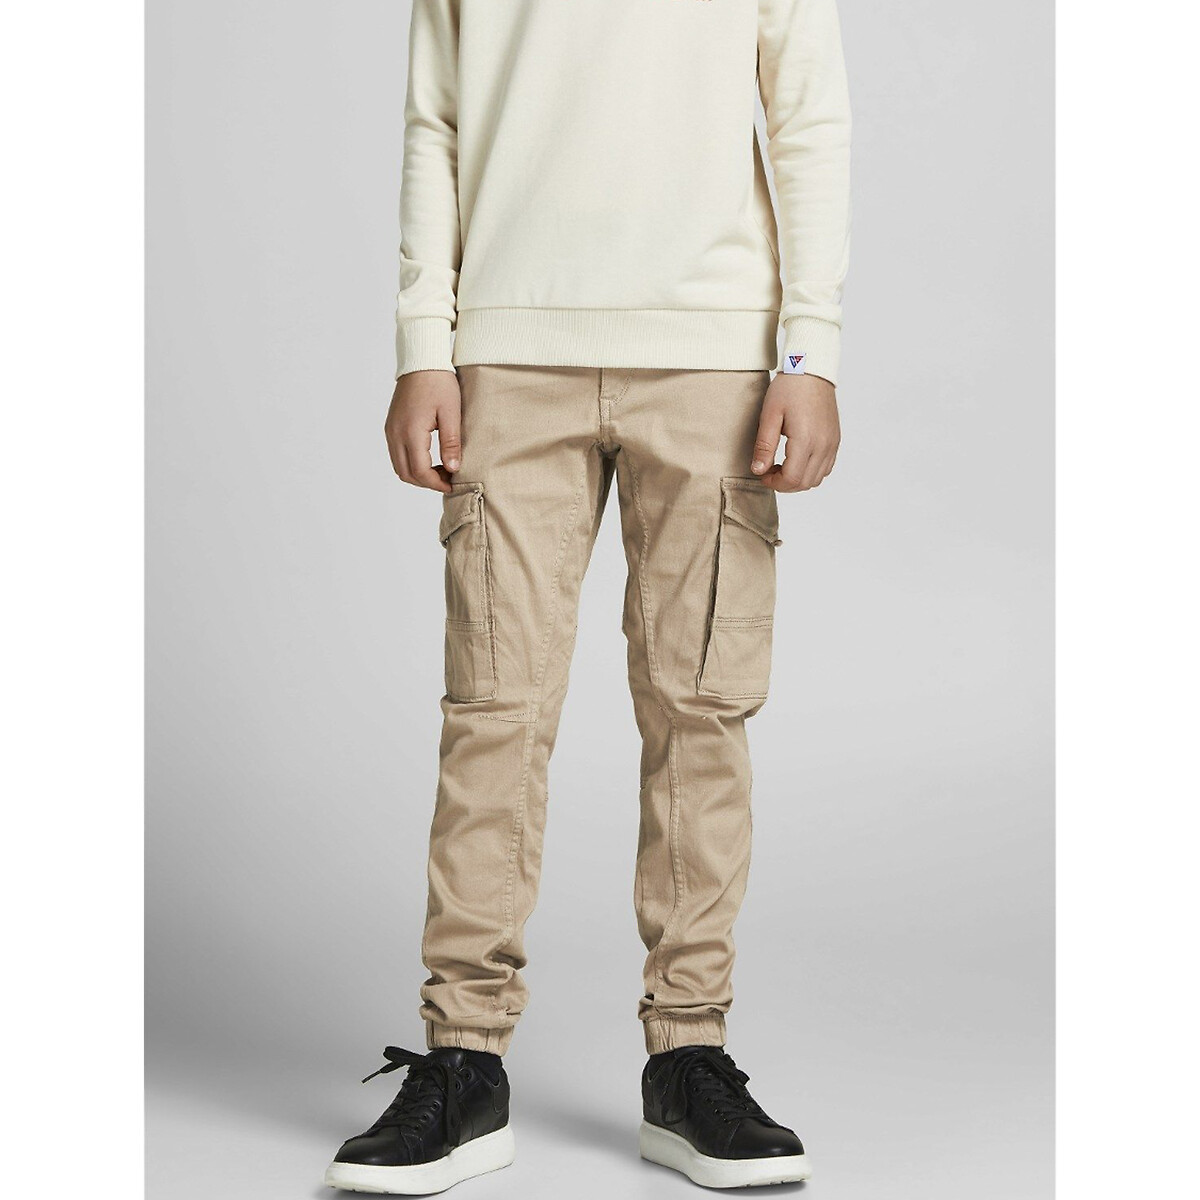 Cotton cargo trousers by Dsquared2 | Tessabit